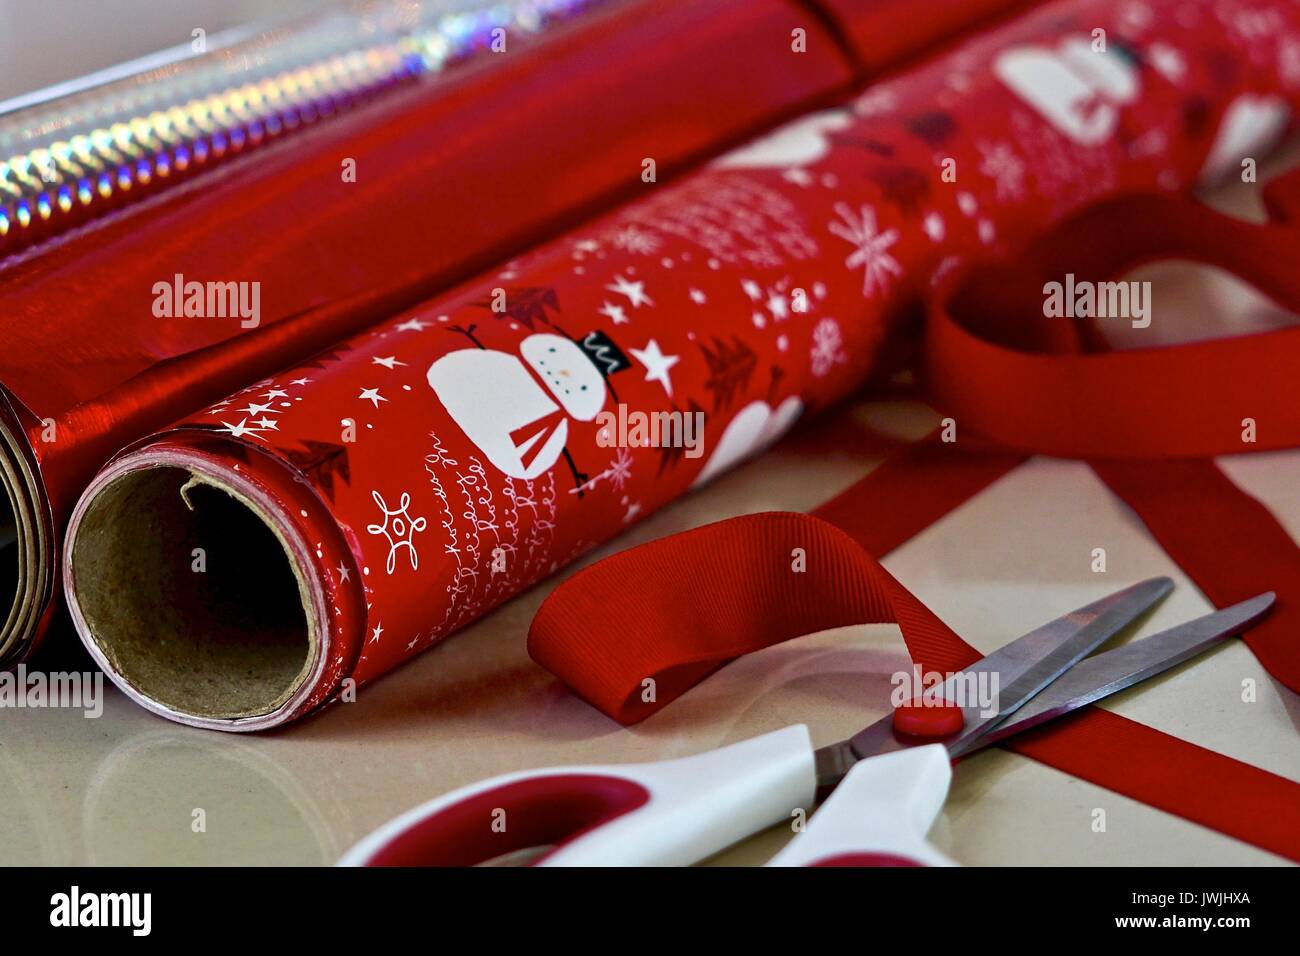 Red And Silver Holiday Wrapping Paper Rolls, 2 Rolls - Papyrus